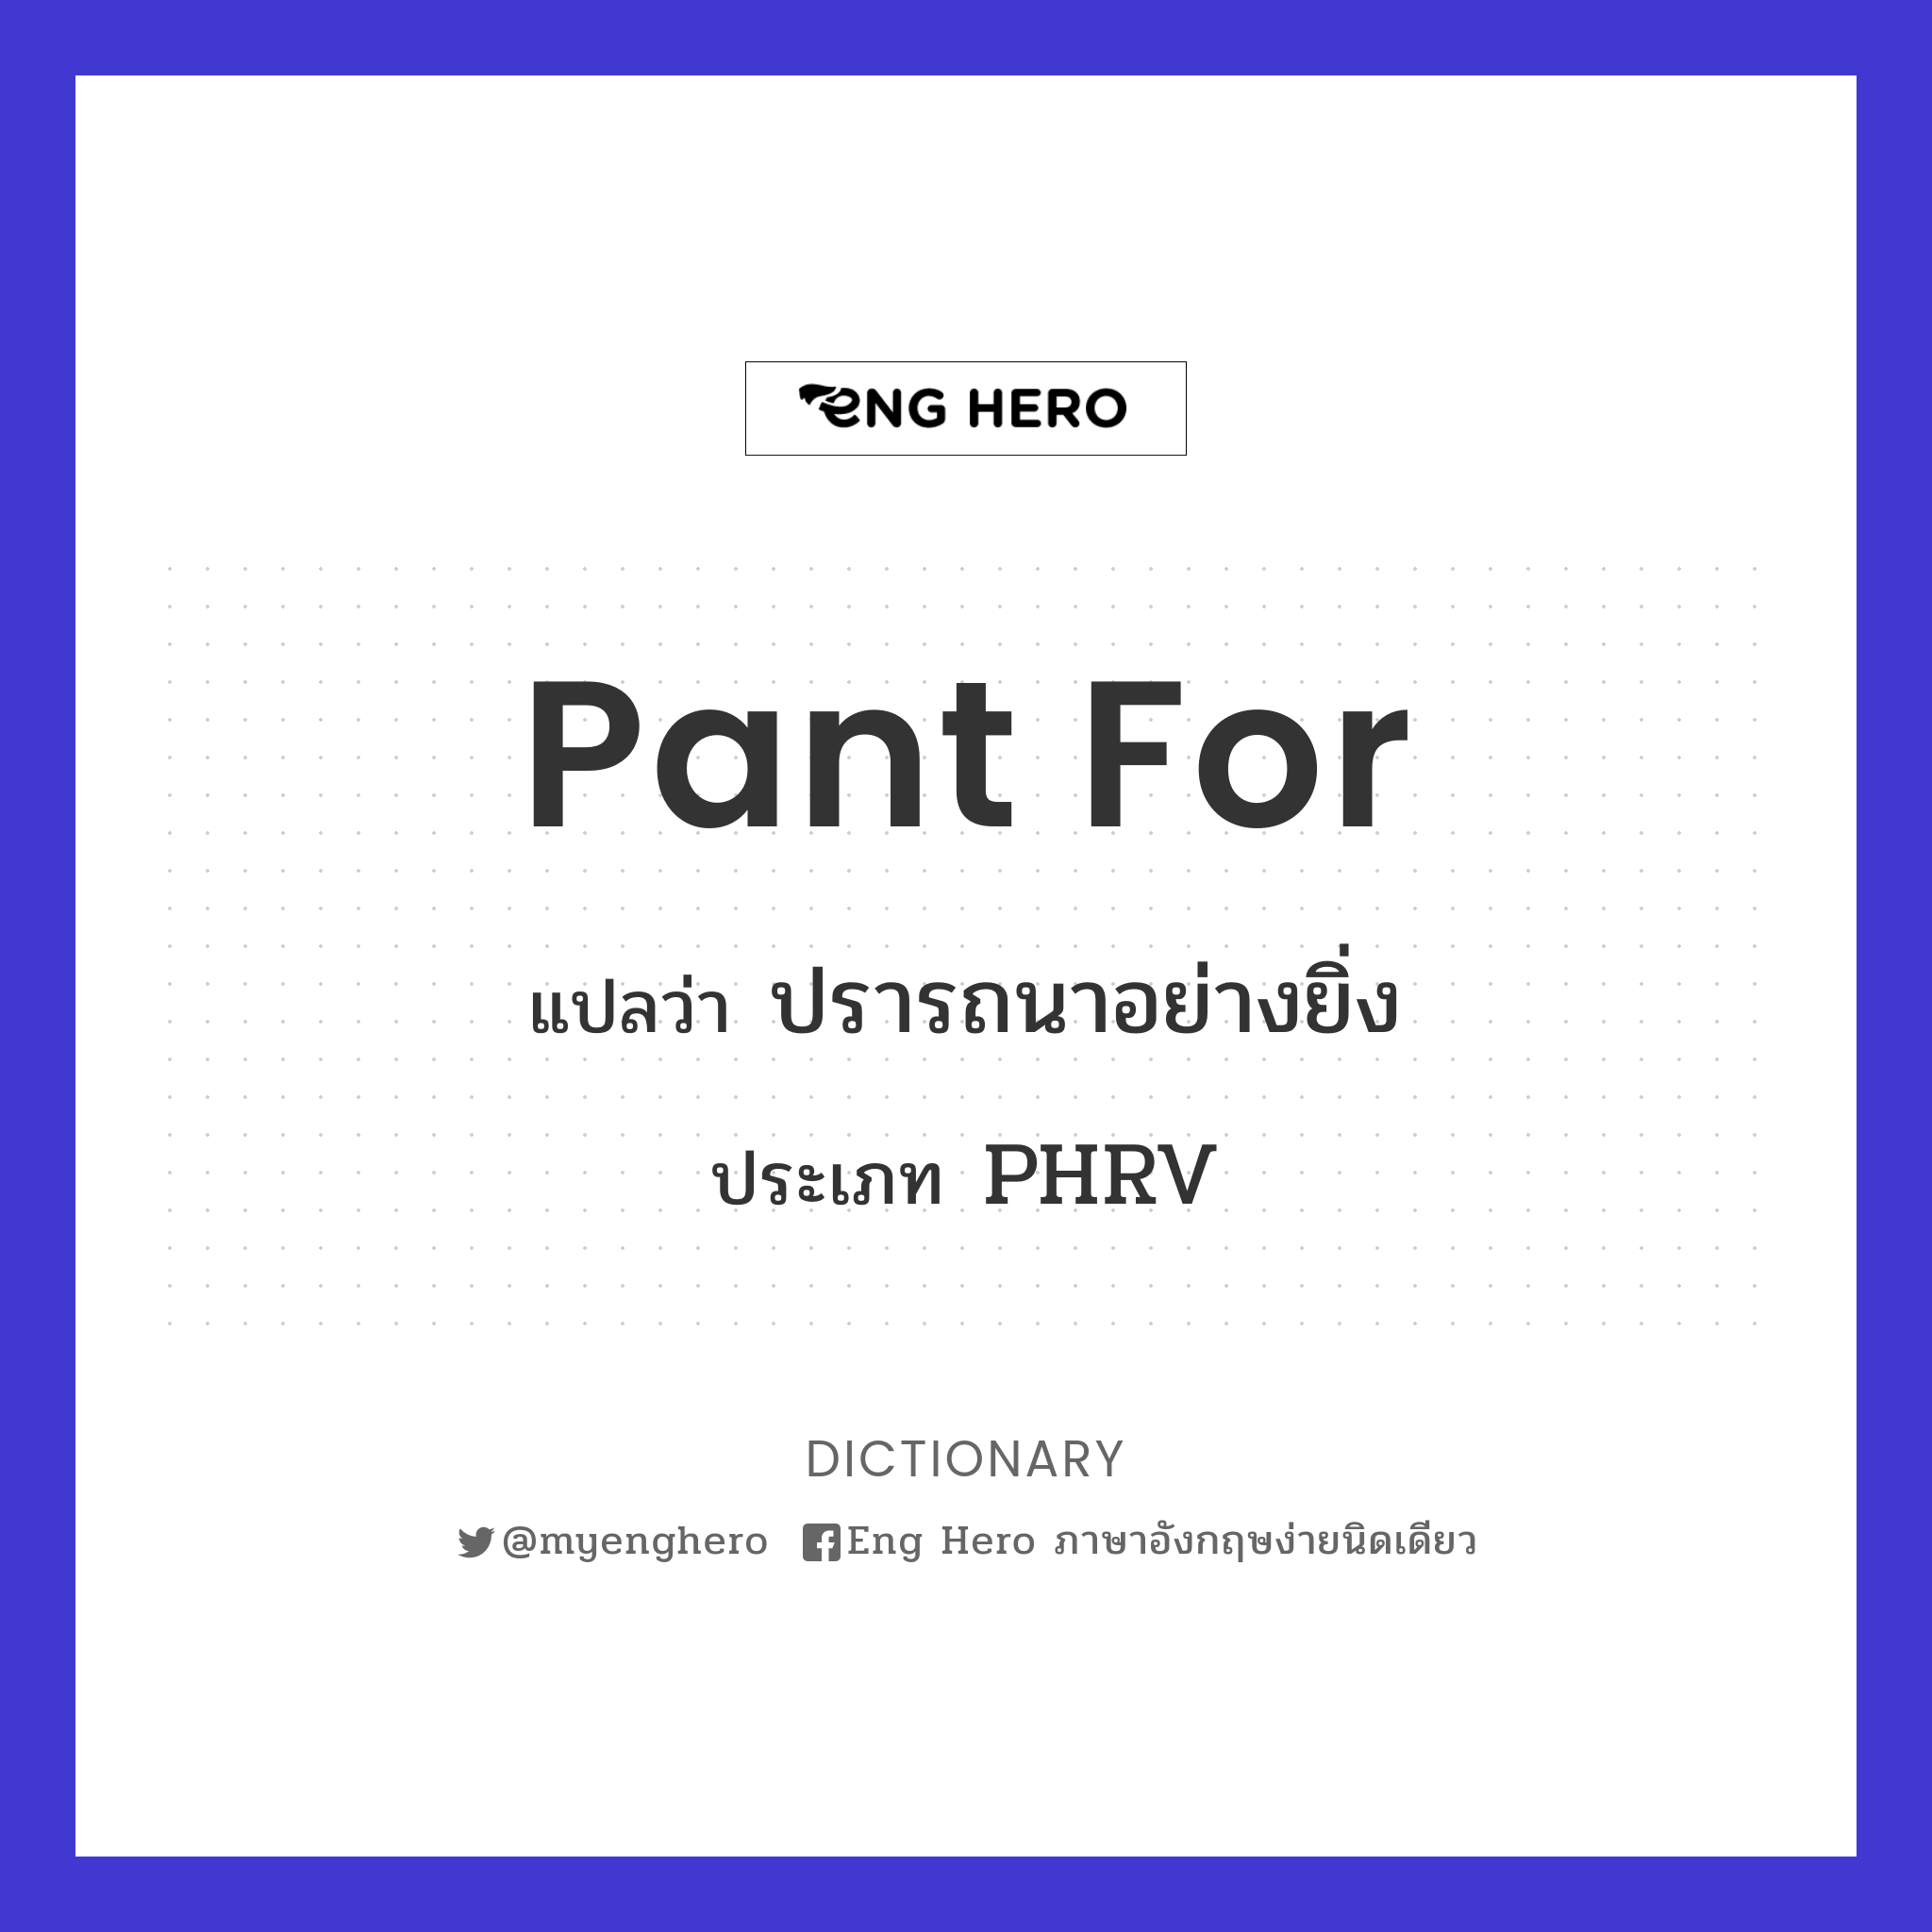 pant for